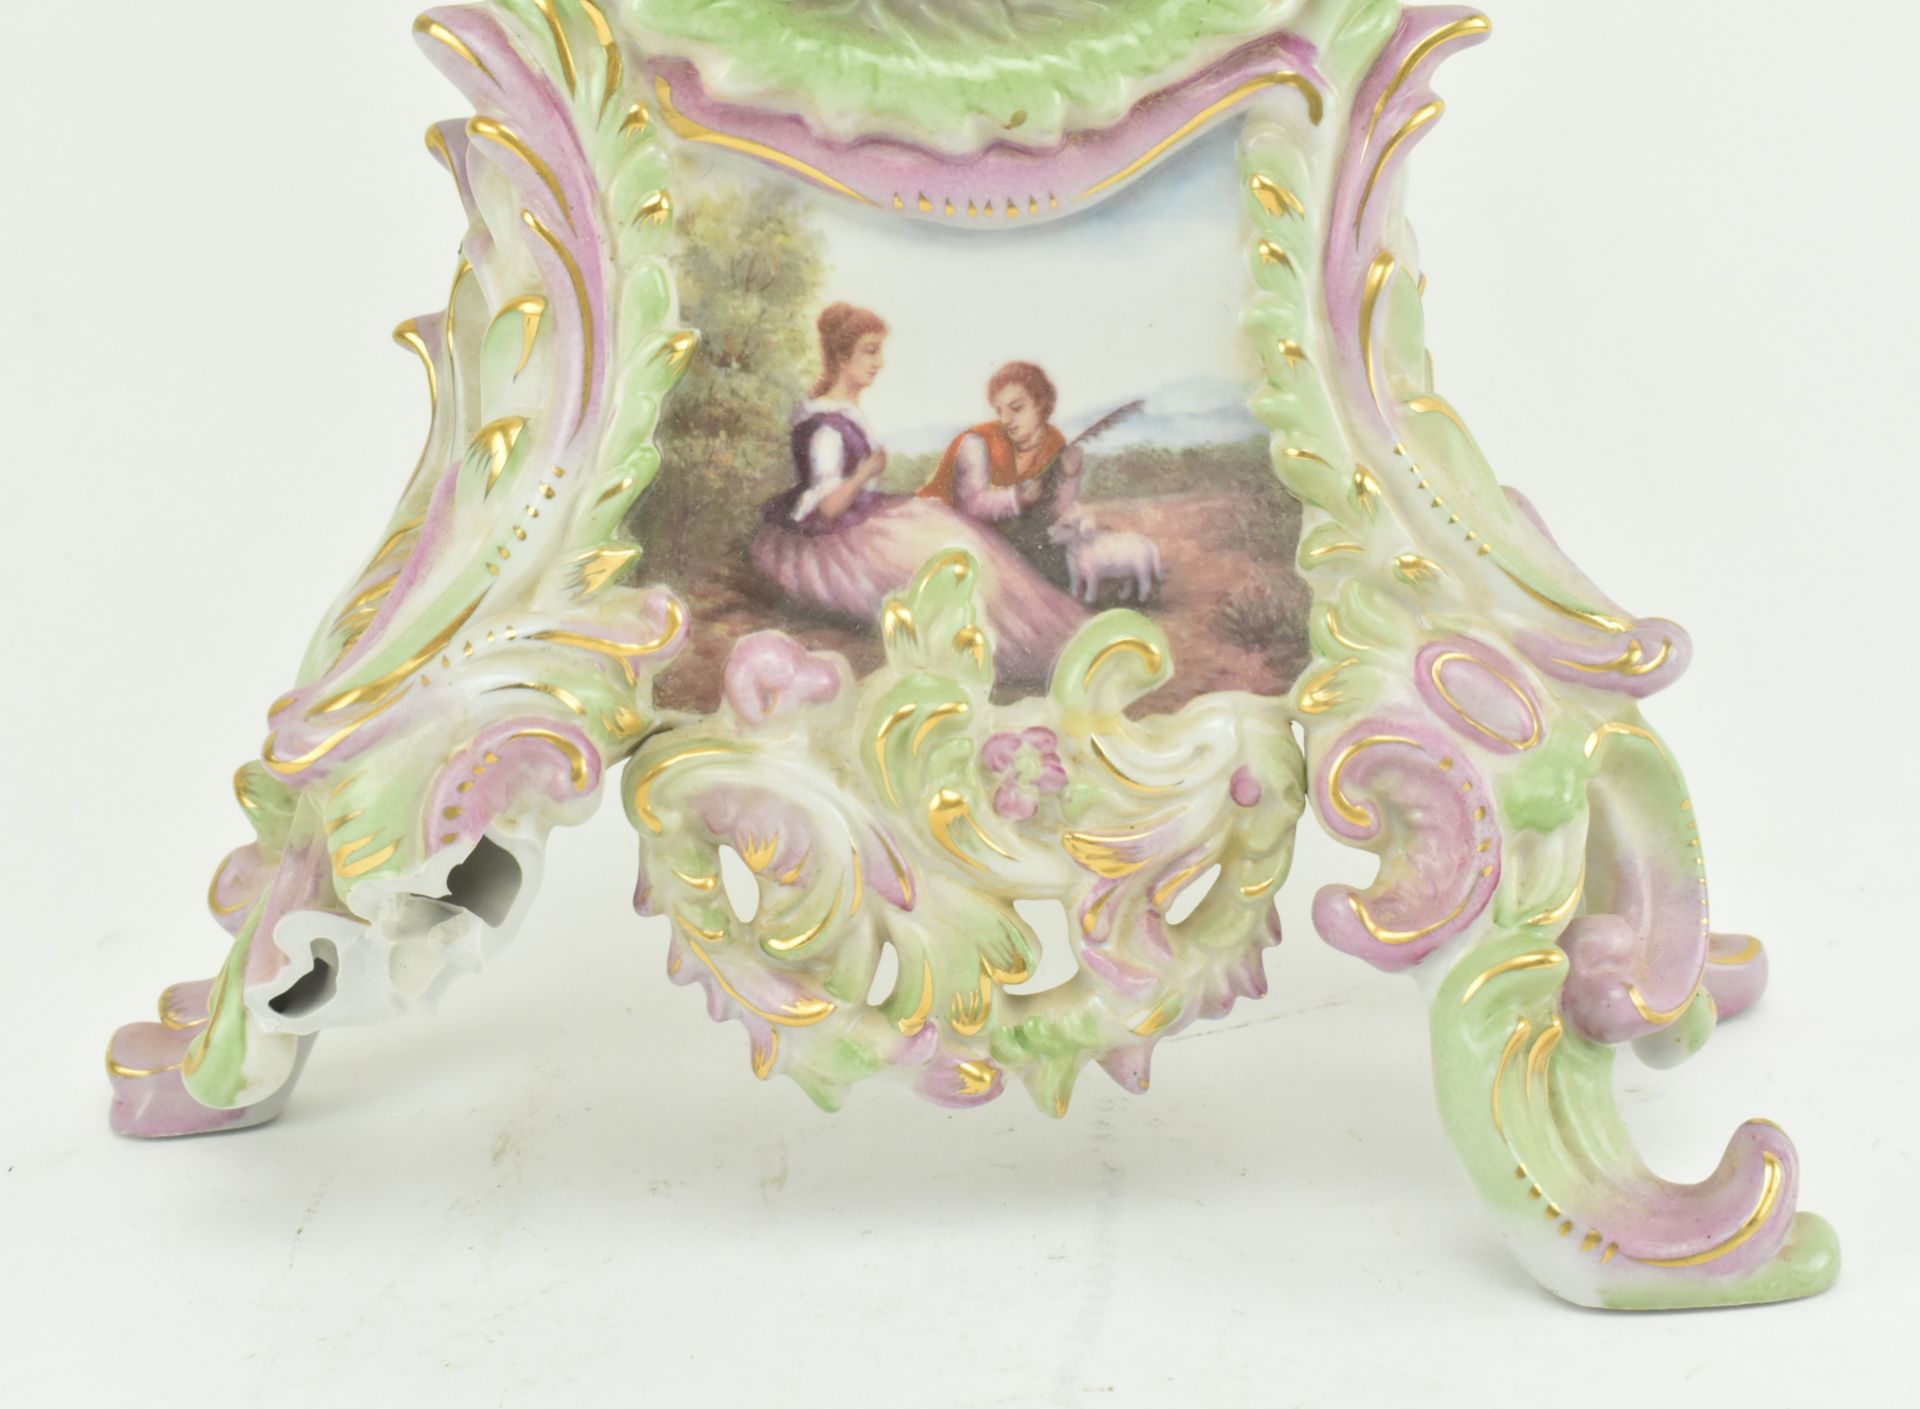 EARLY 20TH CENTURY MEISSEN STYLE PORCELAIN CLOCK - Image 4 of 8